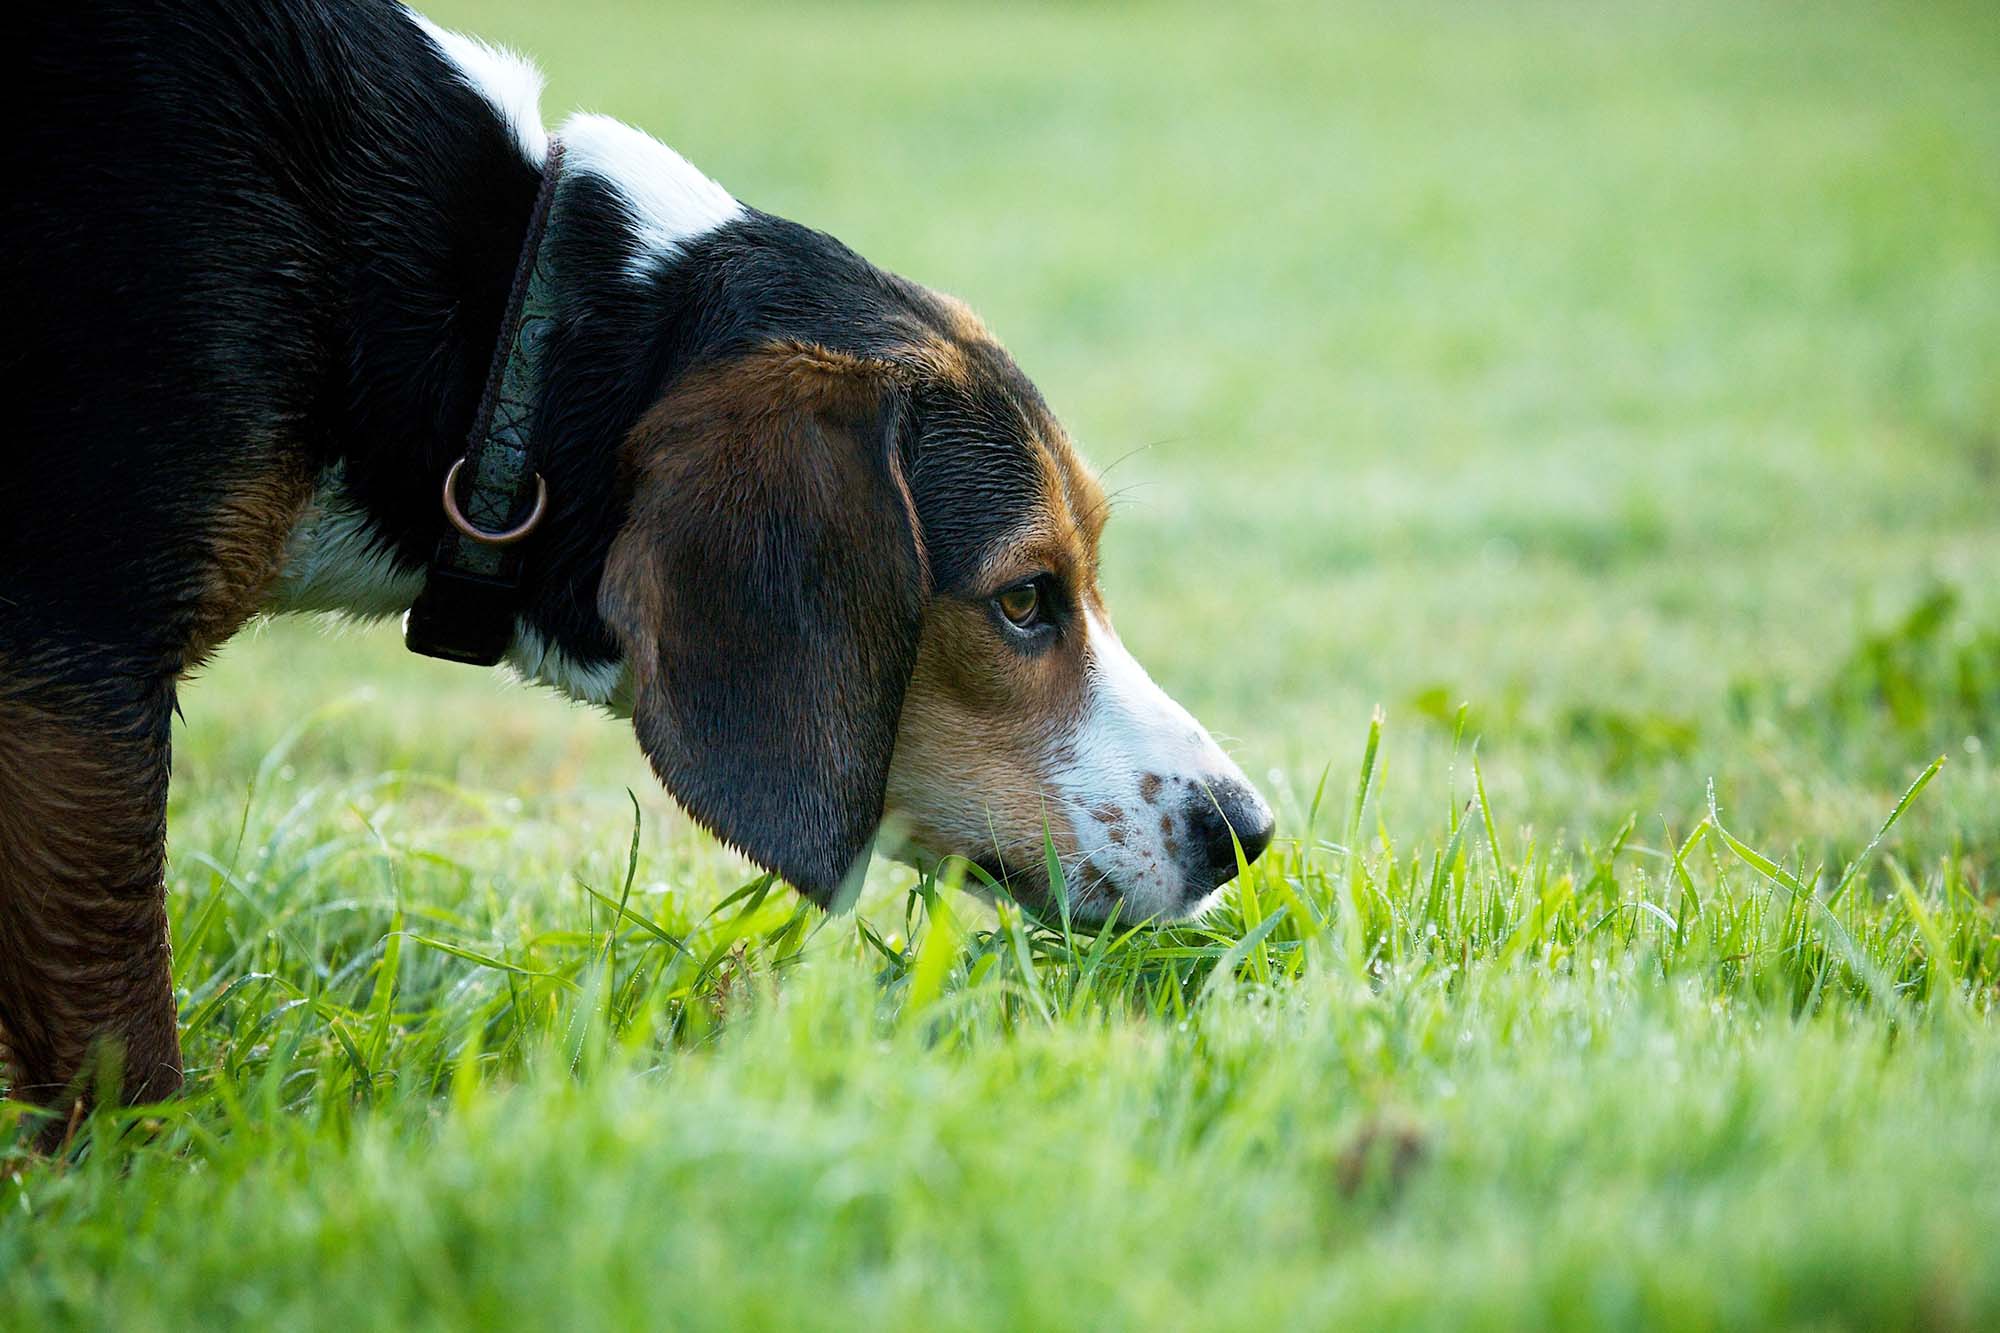 Outdoor head portrait of a Beagle hound dog sniffing in the green grass.